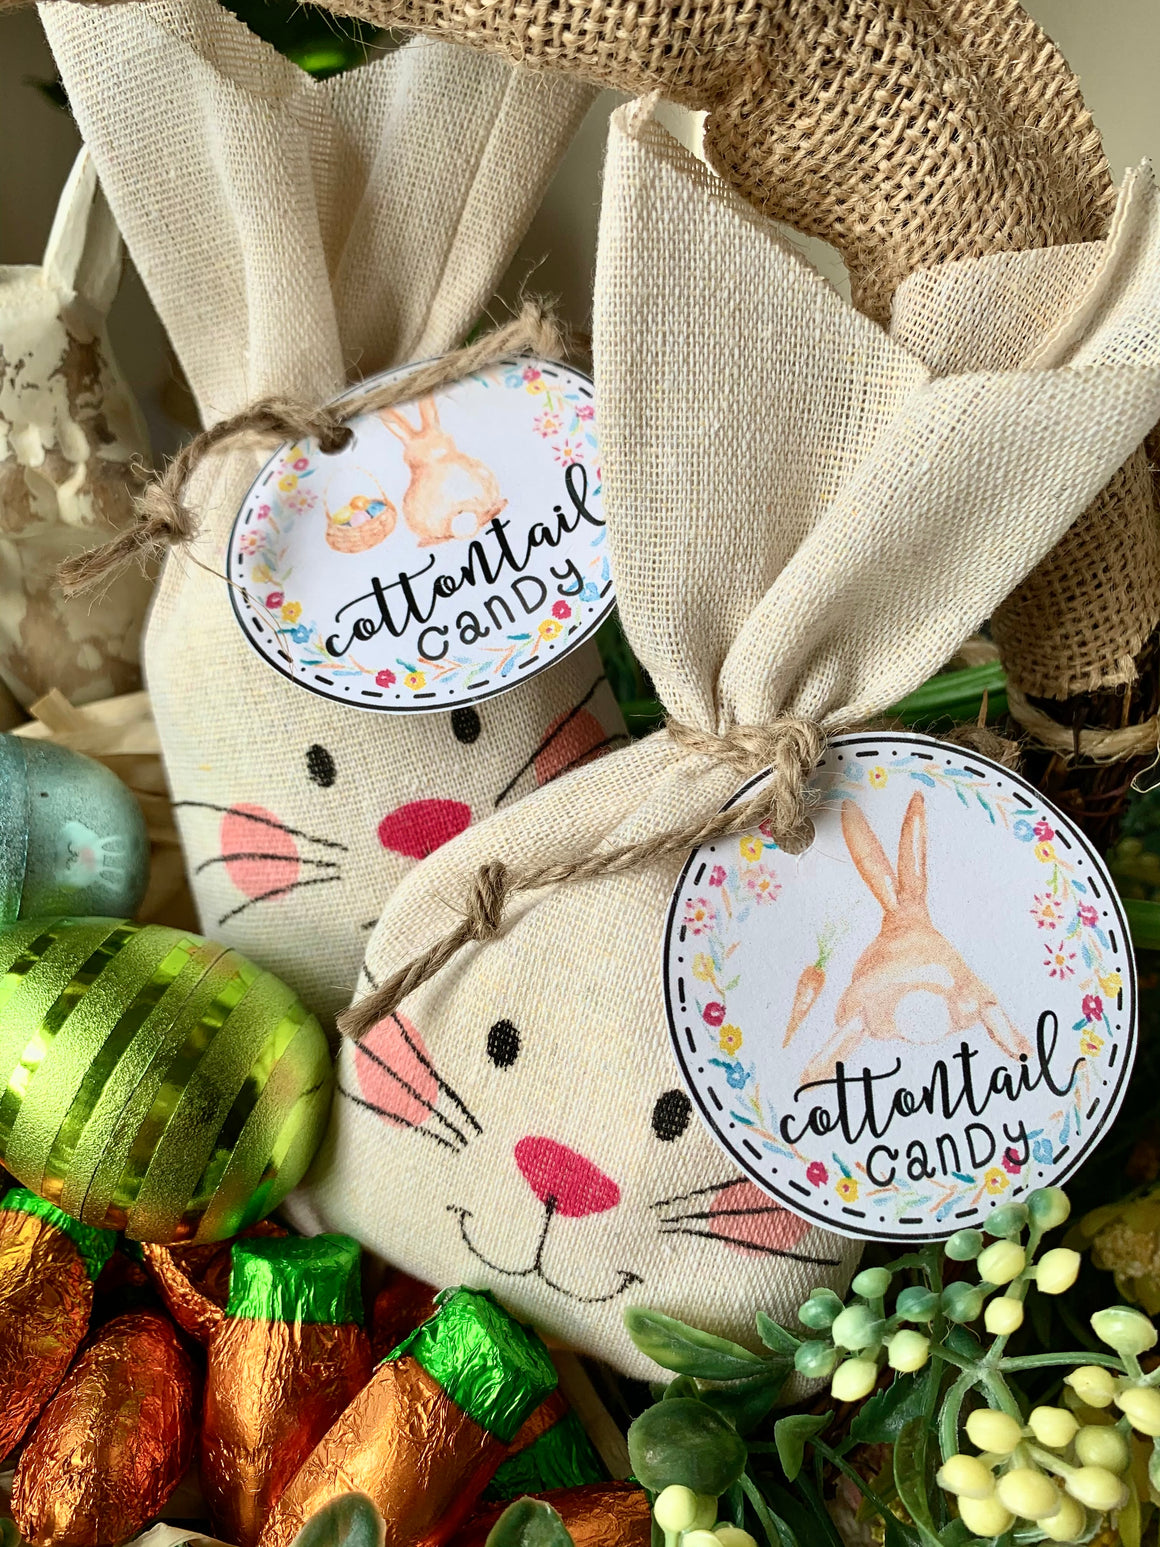 Printable Bunny Gift Tags, Cottontail Candy Gift Tags by SUNSHINETULIPDESIGN